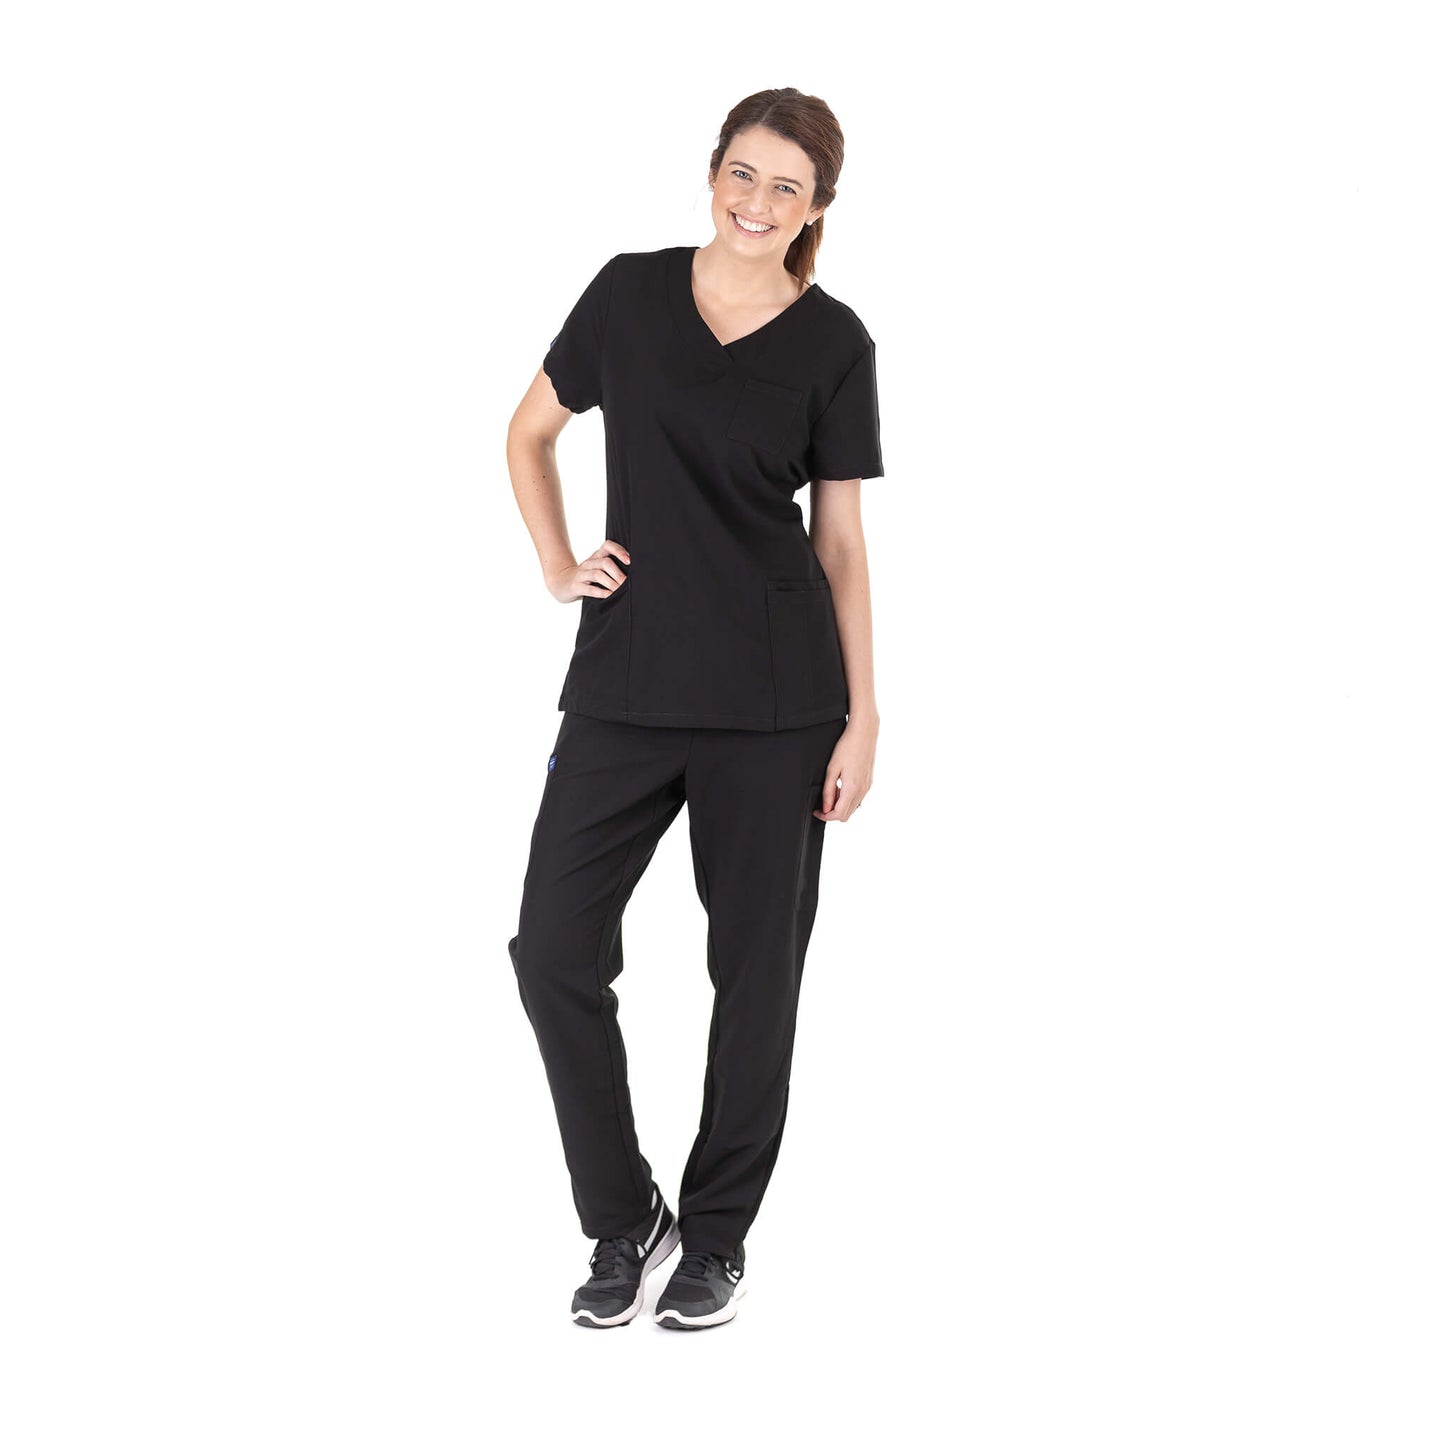 Shop Black Medical Scrubs from Fit Right Medical Scrubs